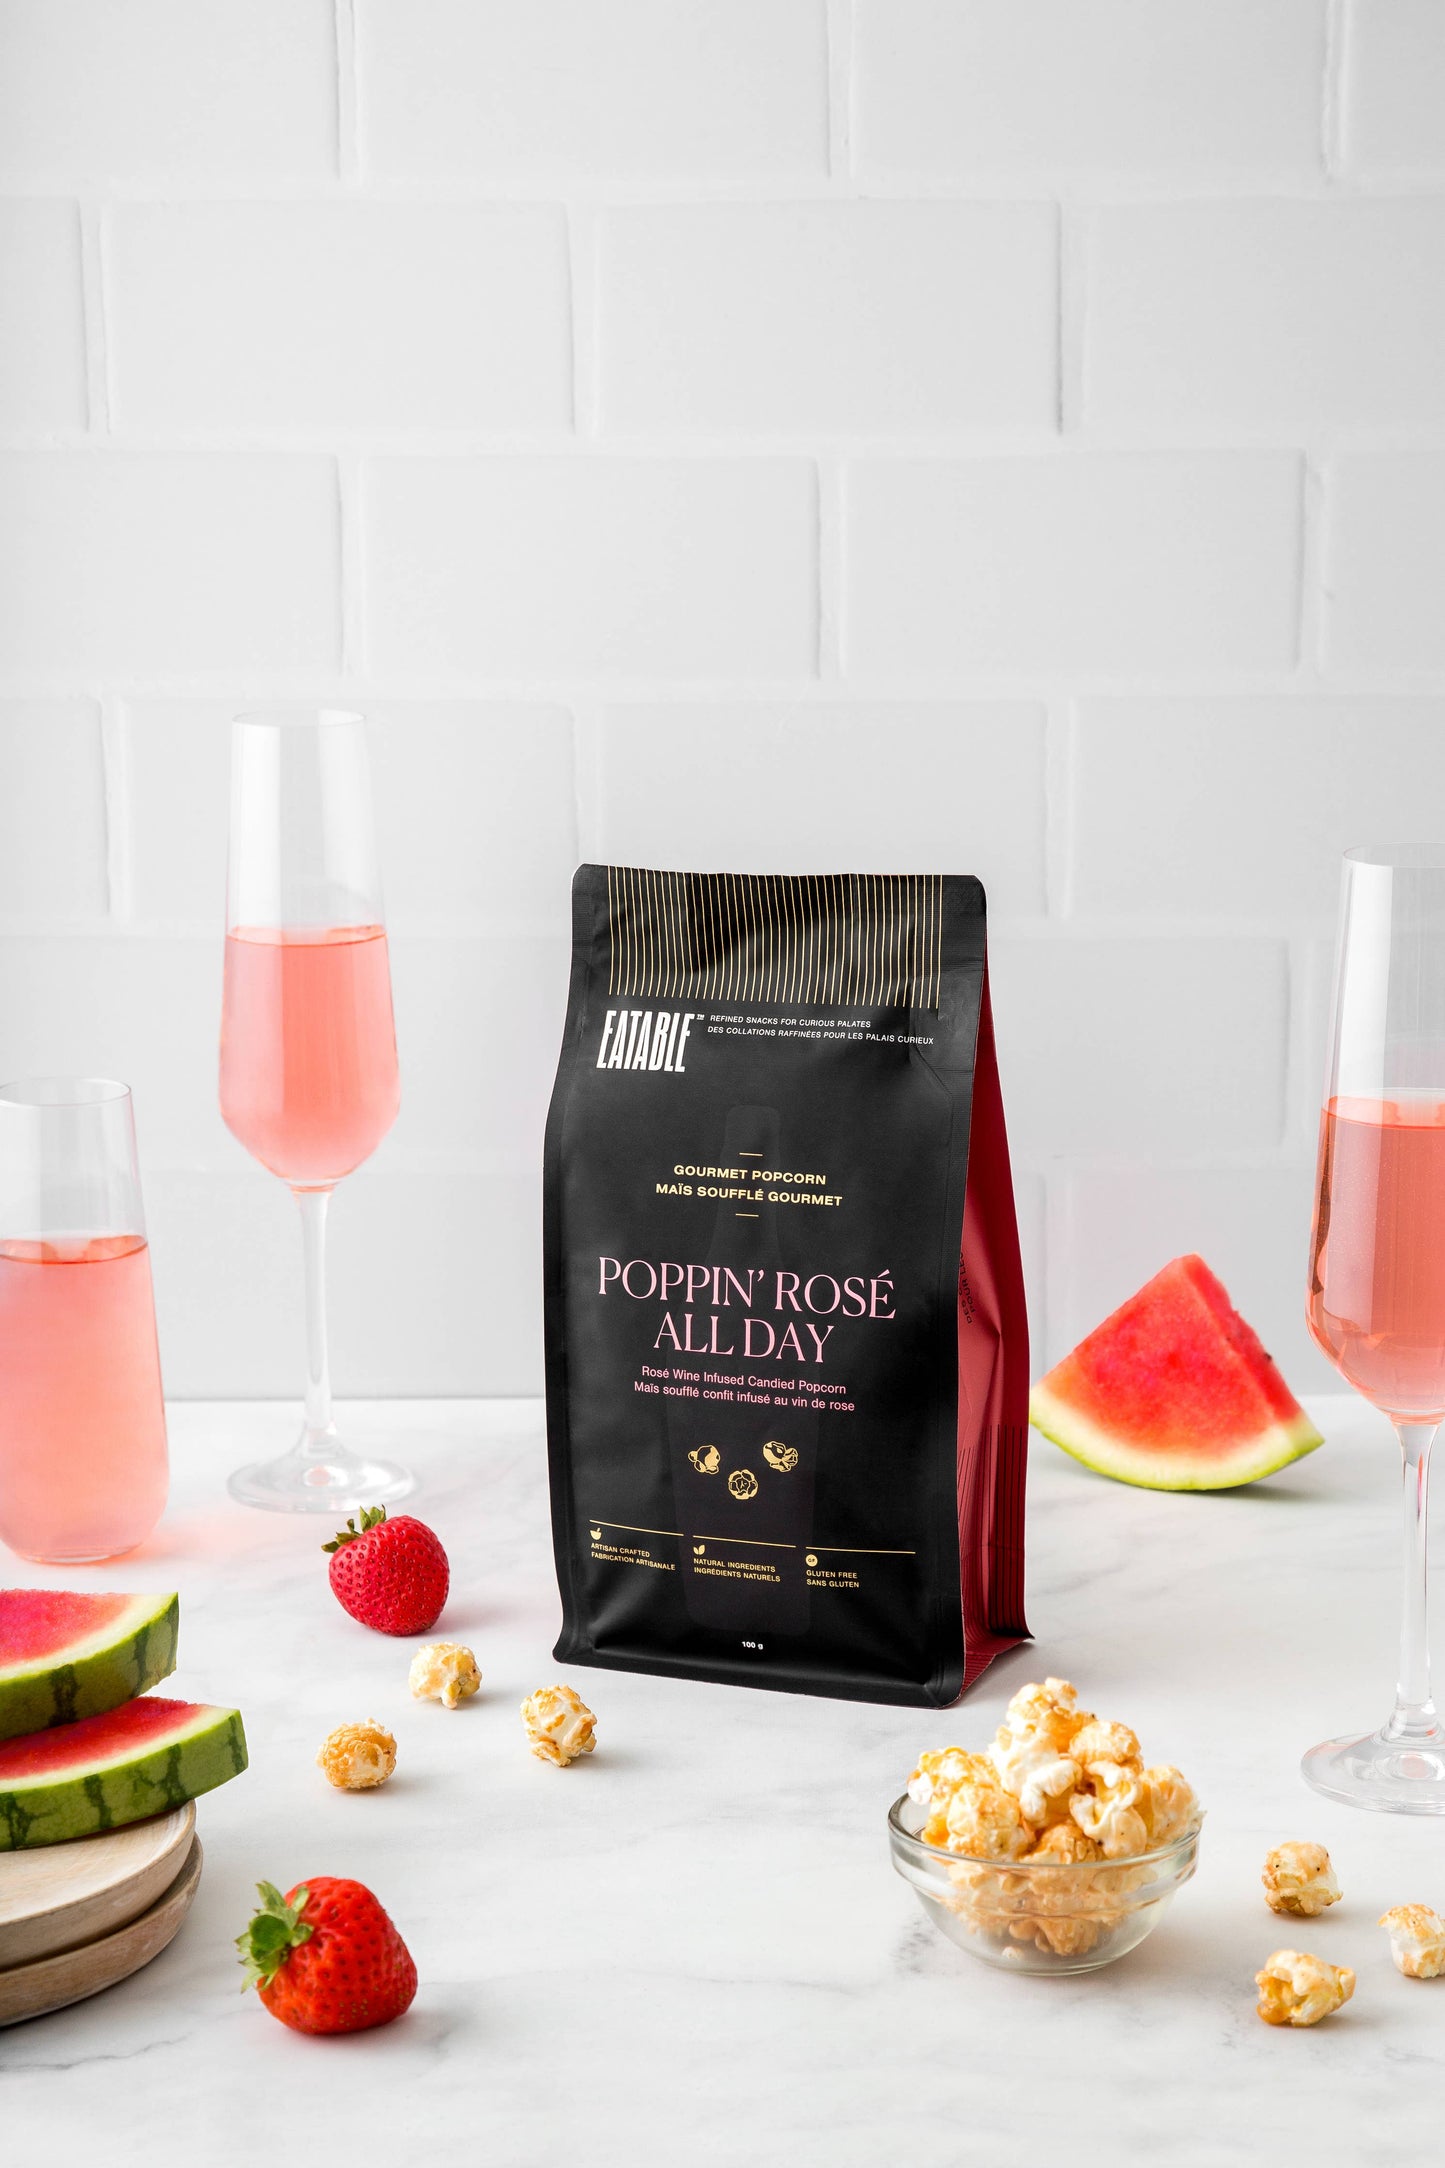 EATABLE Popcorn - Poppin' Rosé All Day (100g) - Wine Infused Gourmet Popcorn